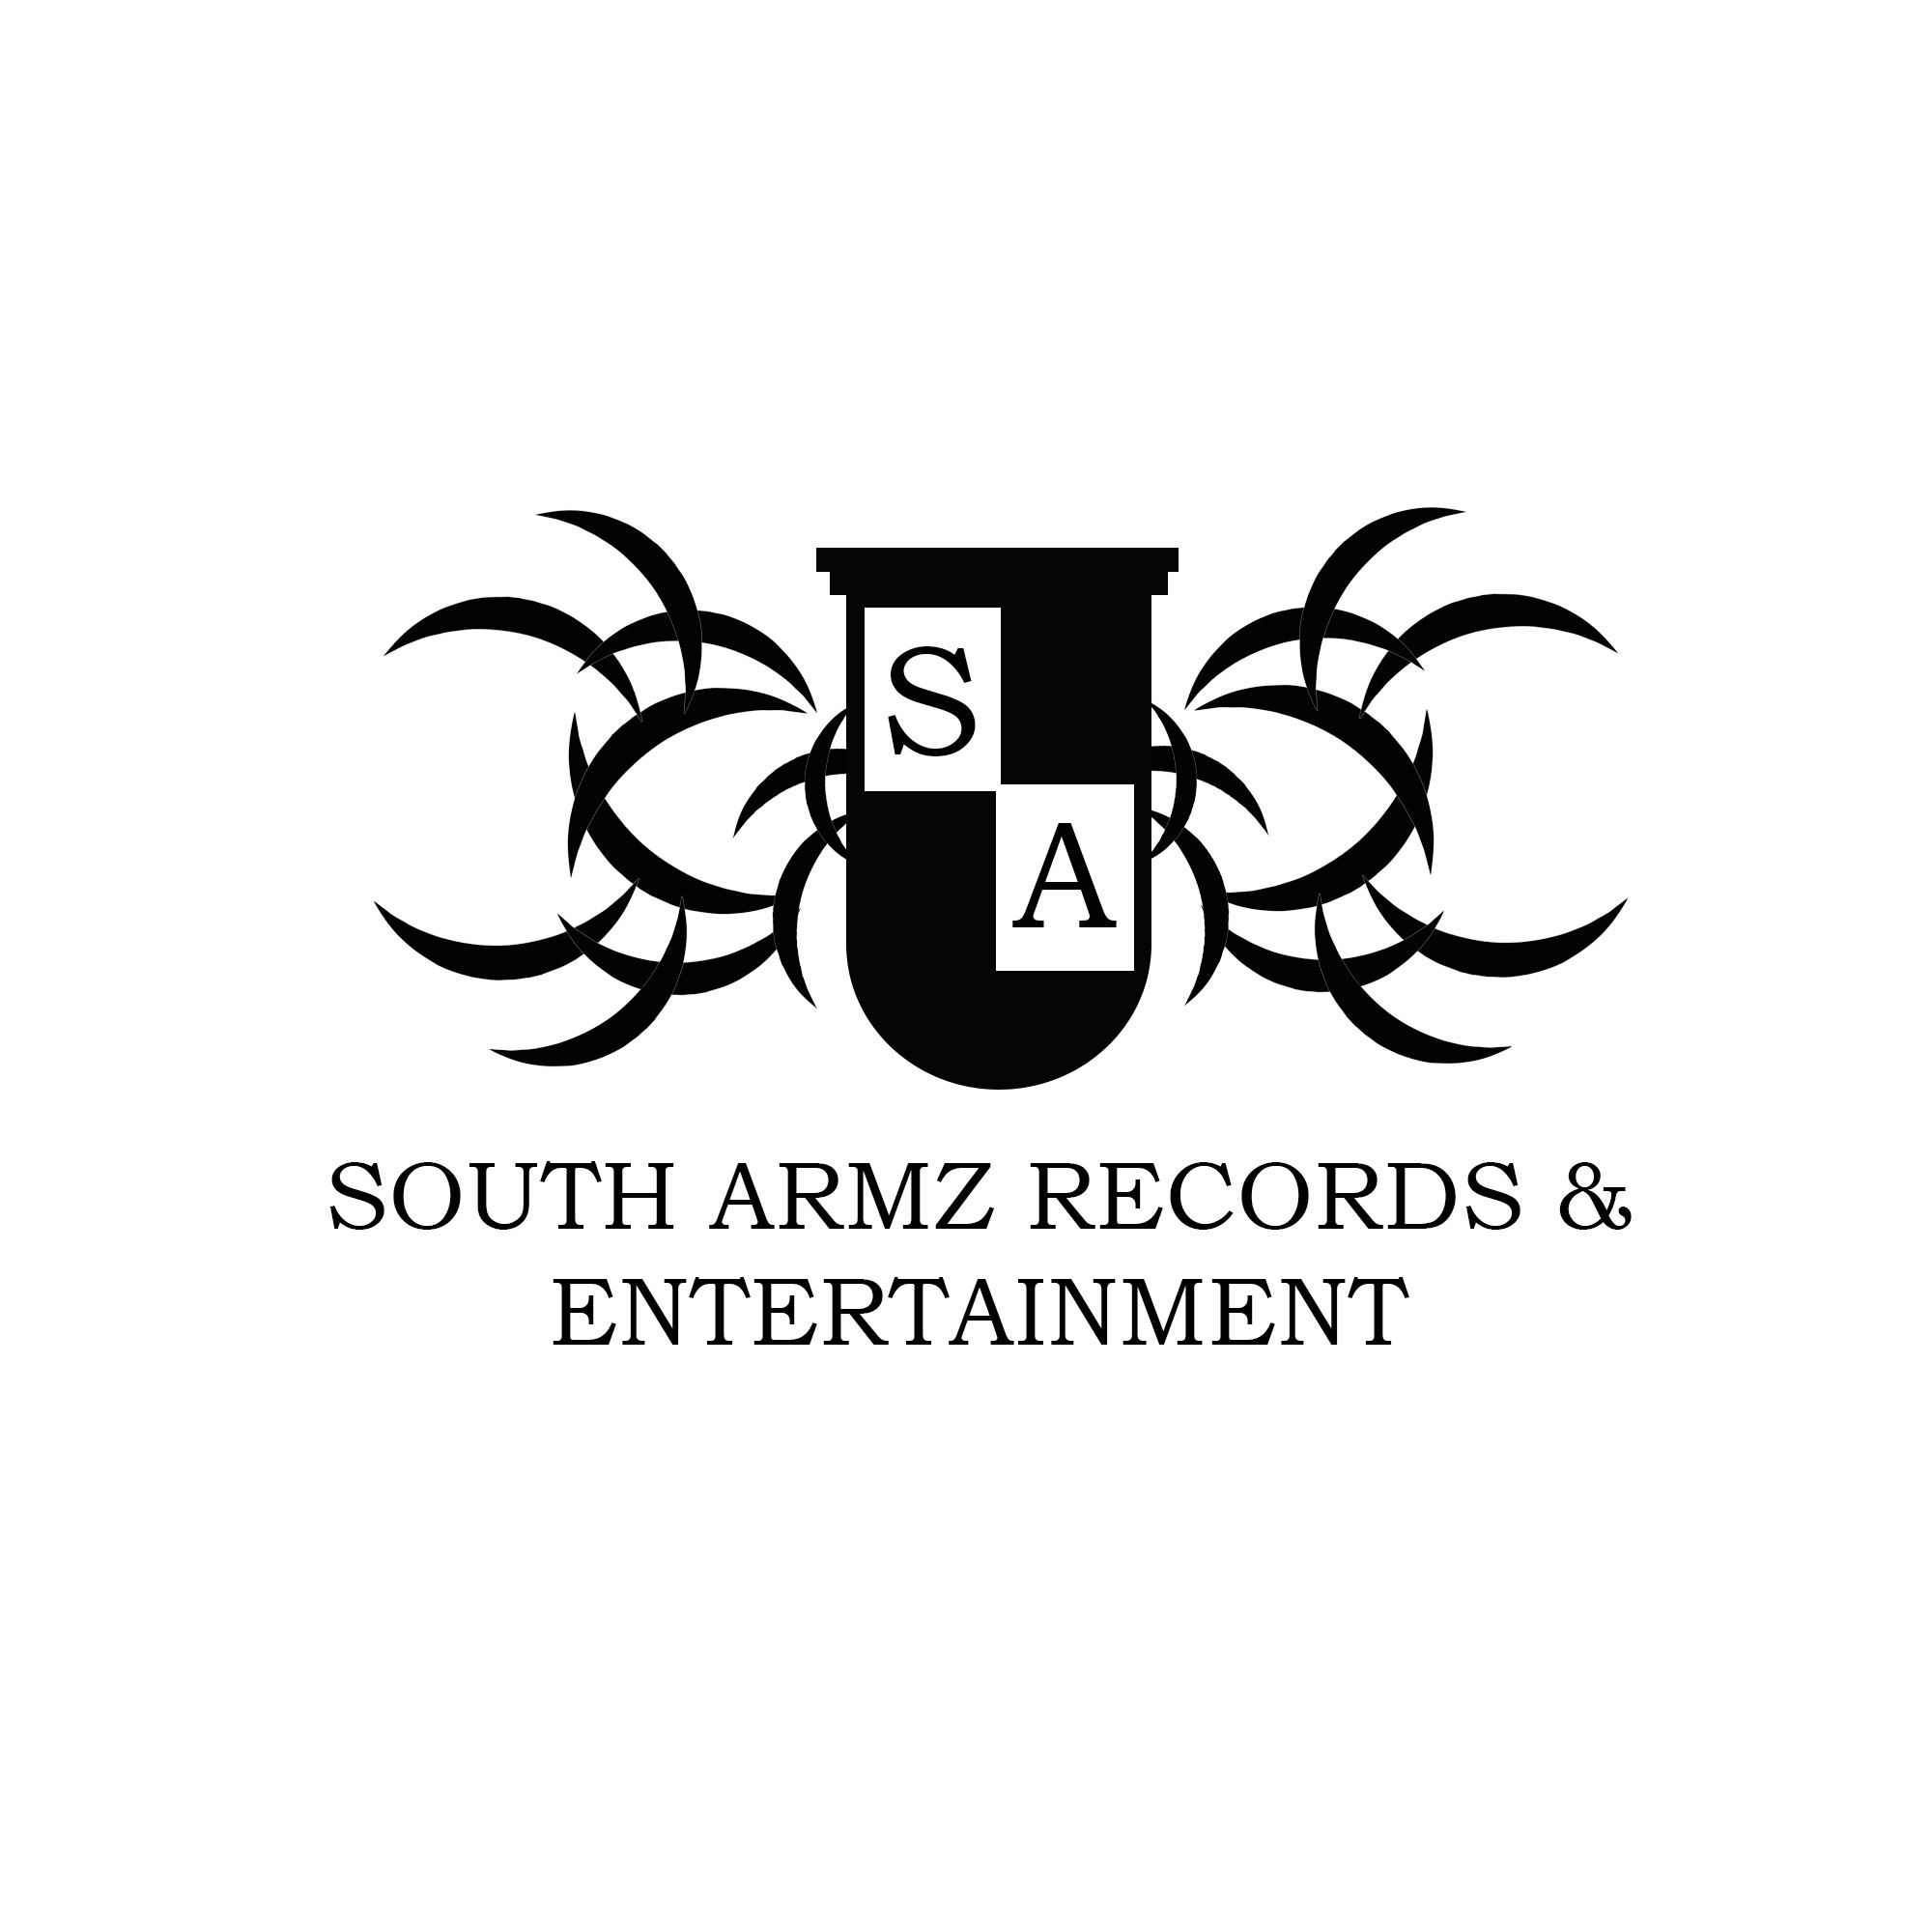 South Armz Records and Entertainment